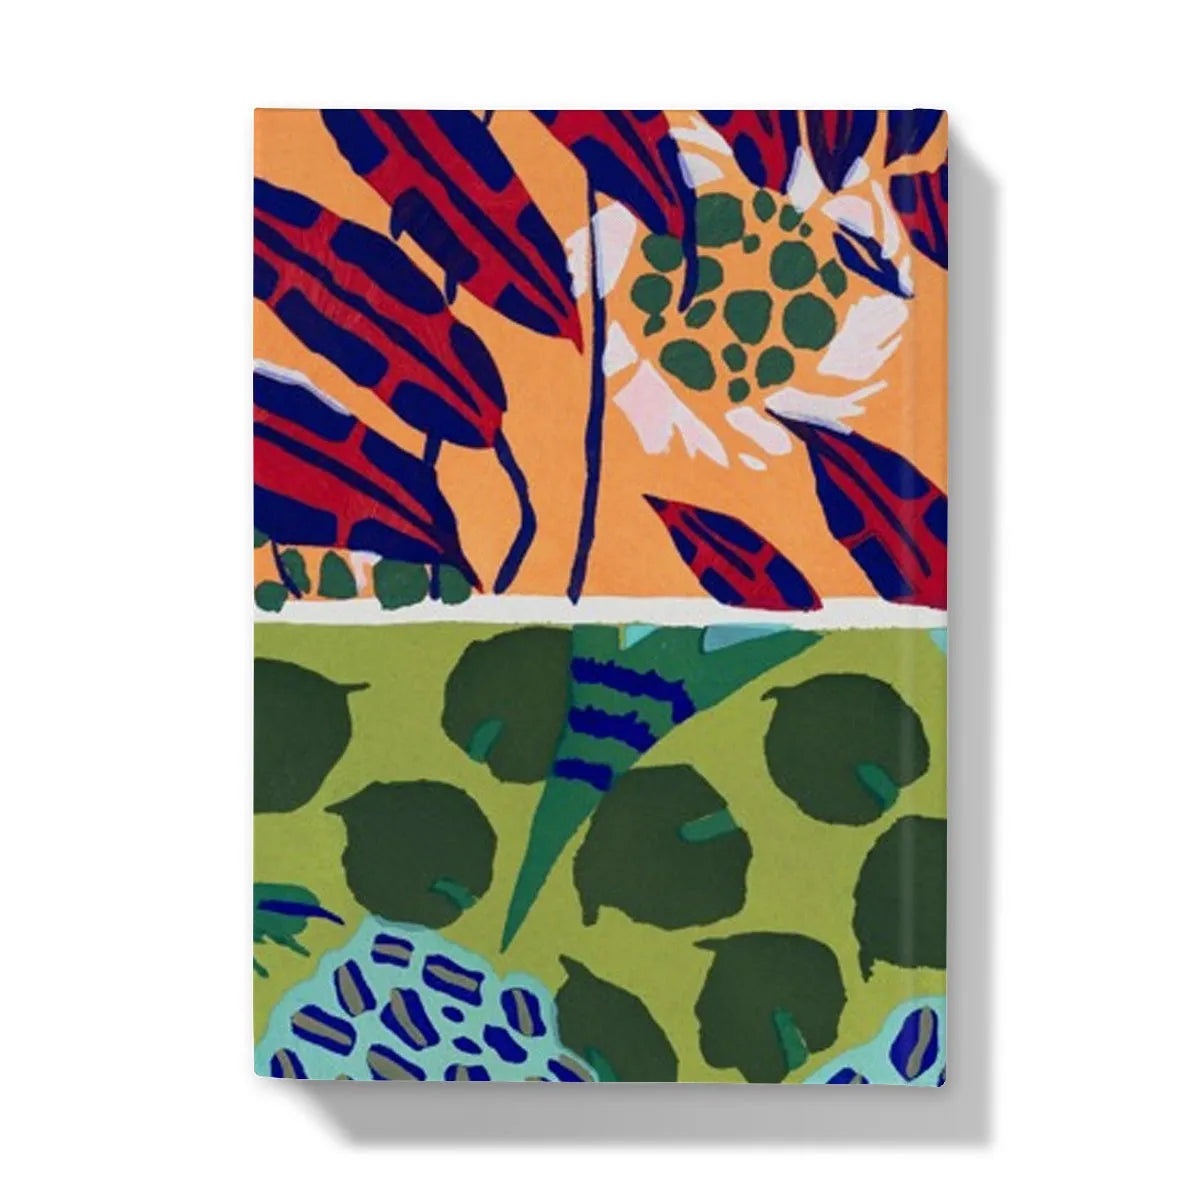 Suggestions Pour étoffes Et Tapis By E. A. Séguy Hardback Journal - Notebooks & Notepads - Aesthetic Art